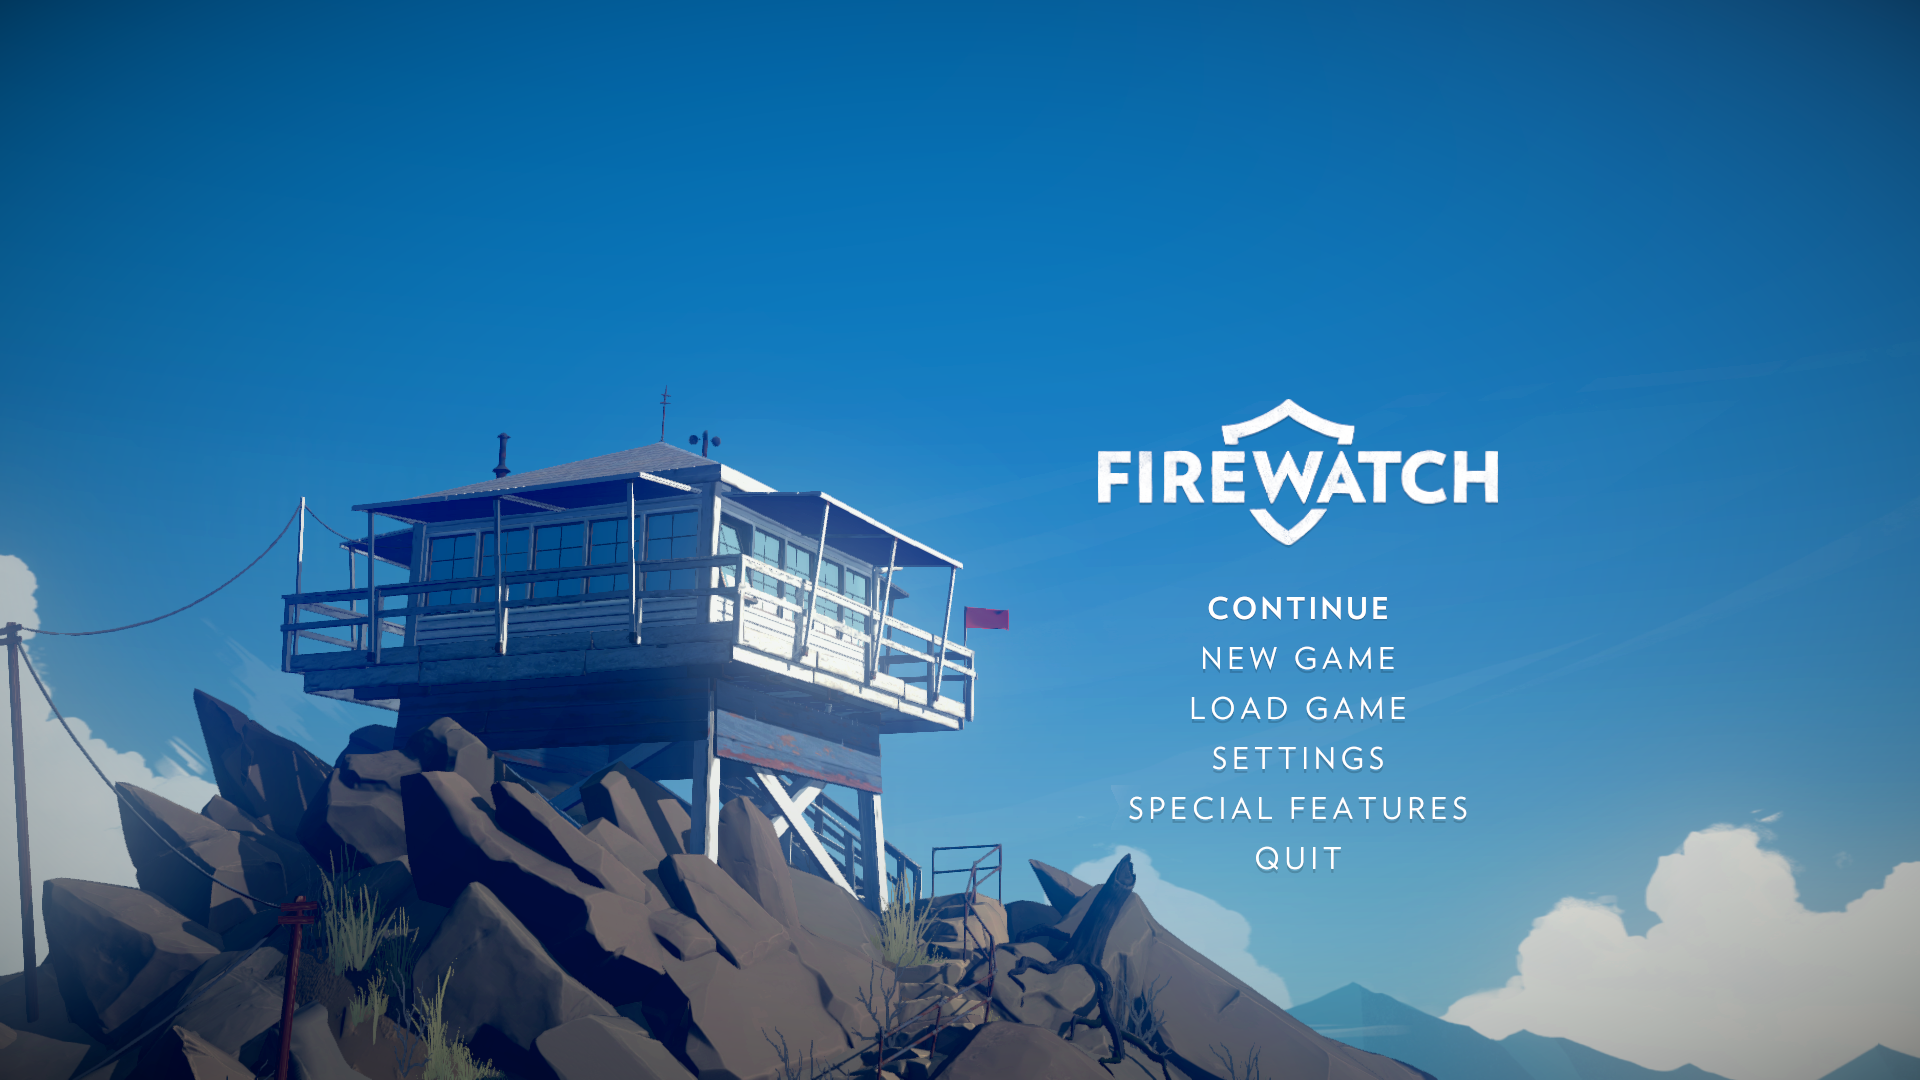 How Long is the Firewatch?